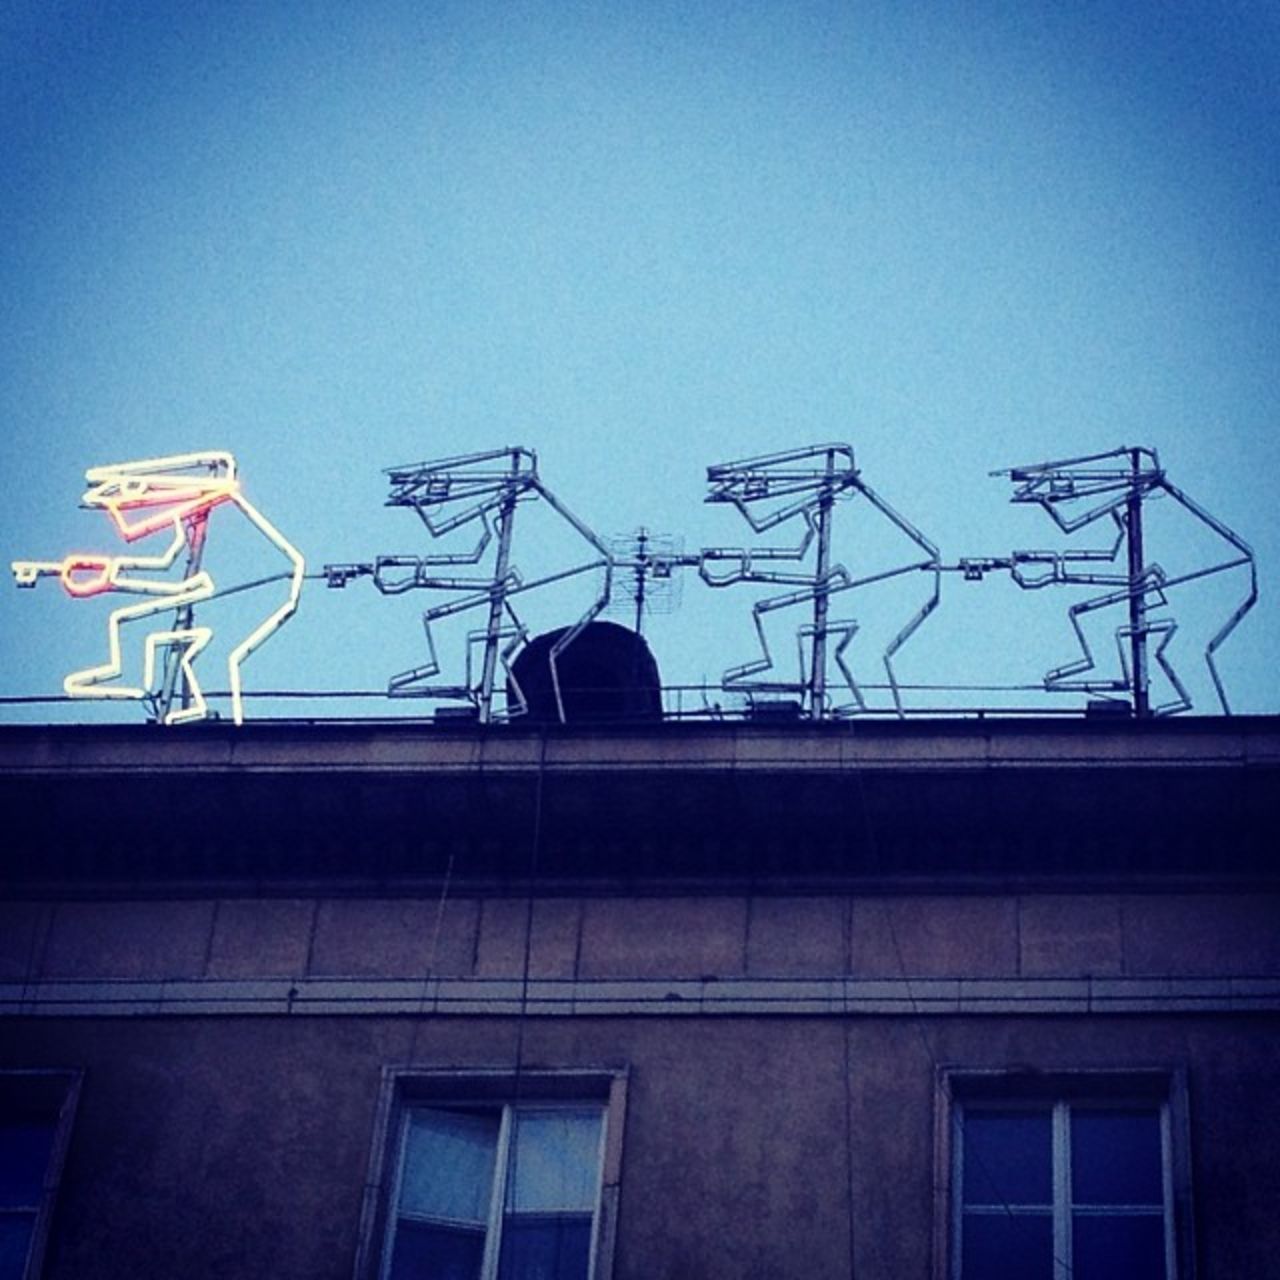 A neon sign on the roof of a building as captured by the Instagramers Wroclaw collective.